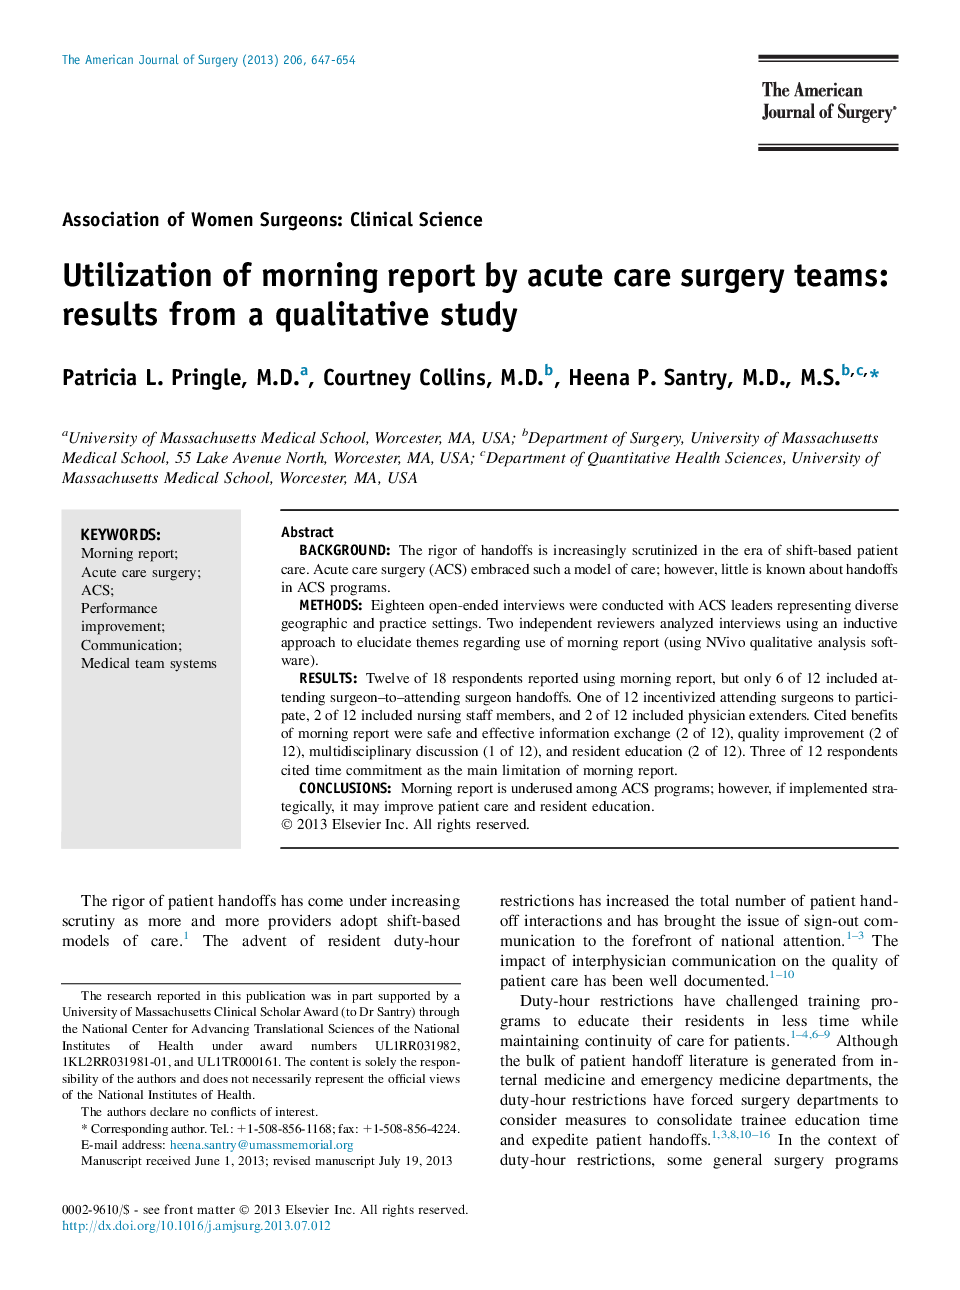 Utilization of morning report by acute care surgery teams: results from a qualitative study 